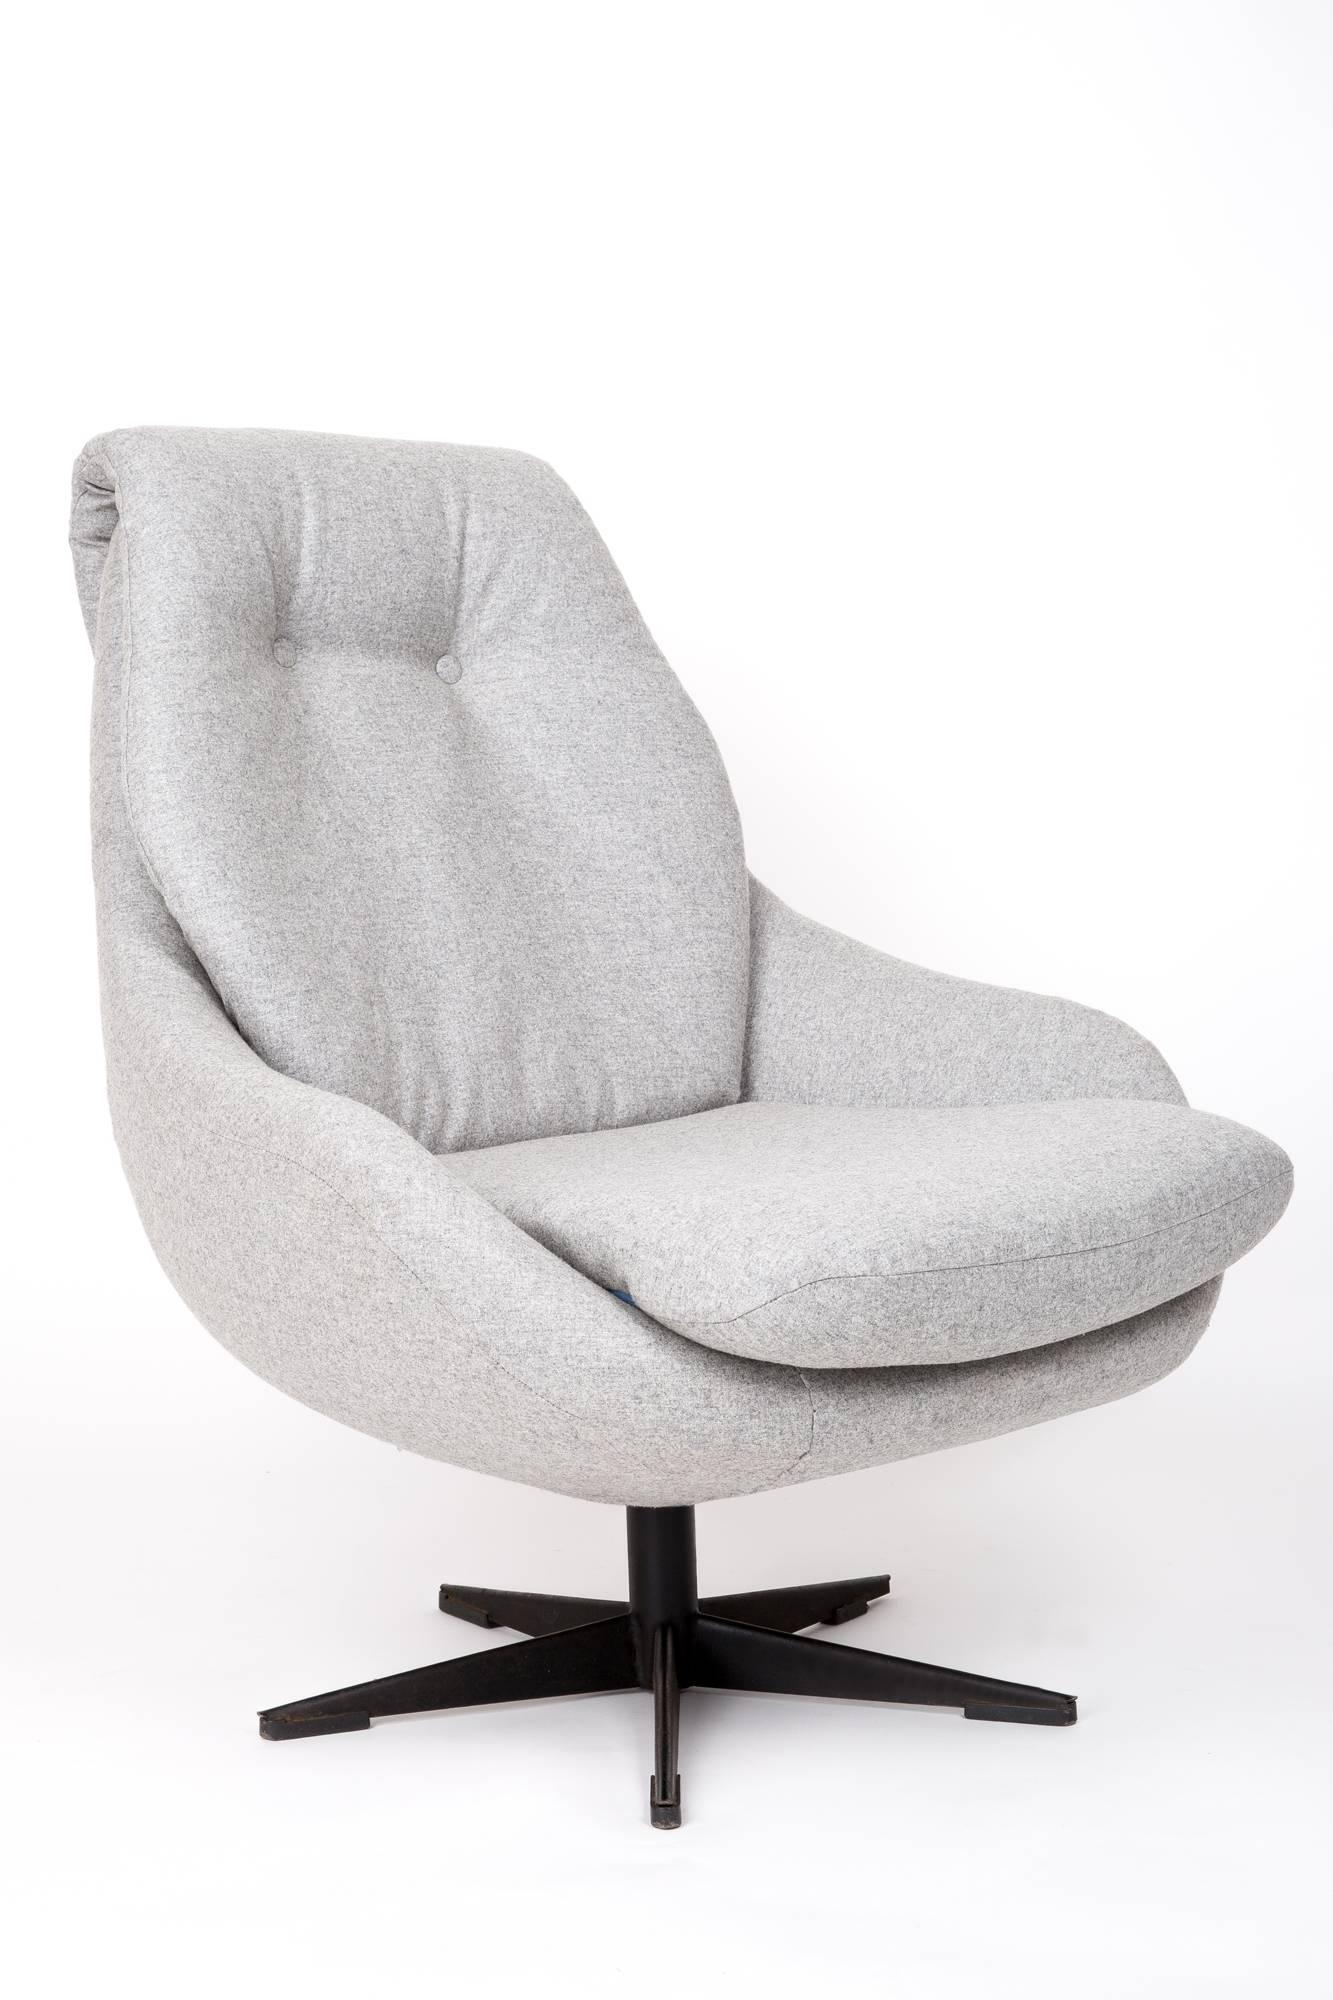 Swivel armchair from the 1960s, produced in the Silesian furniture factory in Swiebodzin - at the moment they are unique. Due to their dimensions, they perfectly blend in even in small apartments providing comfort and beautiful decoration. Covered